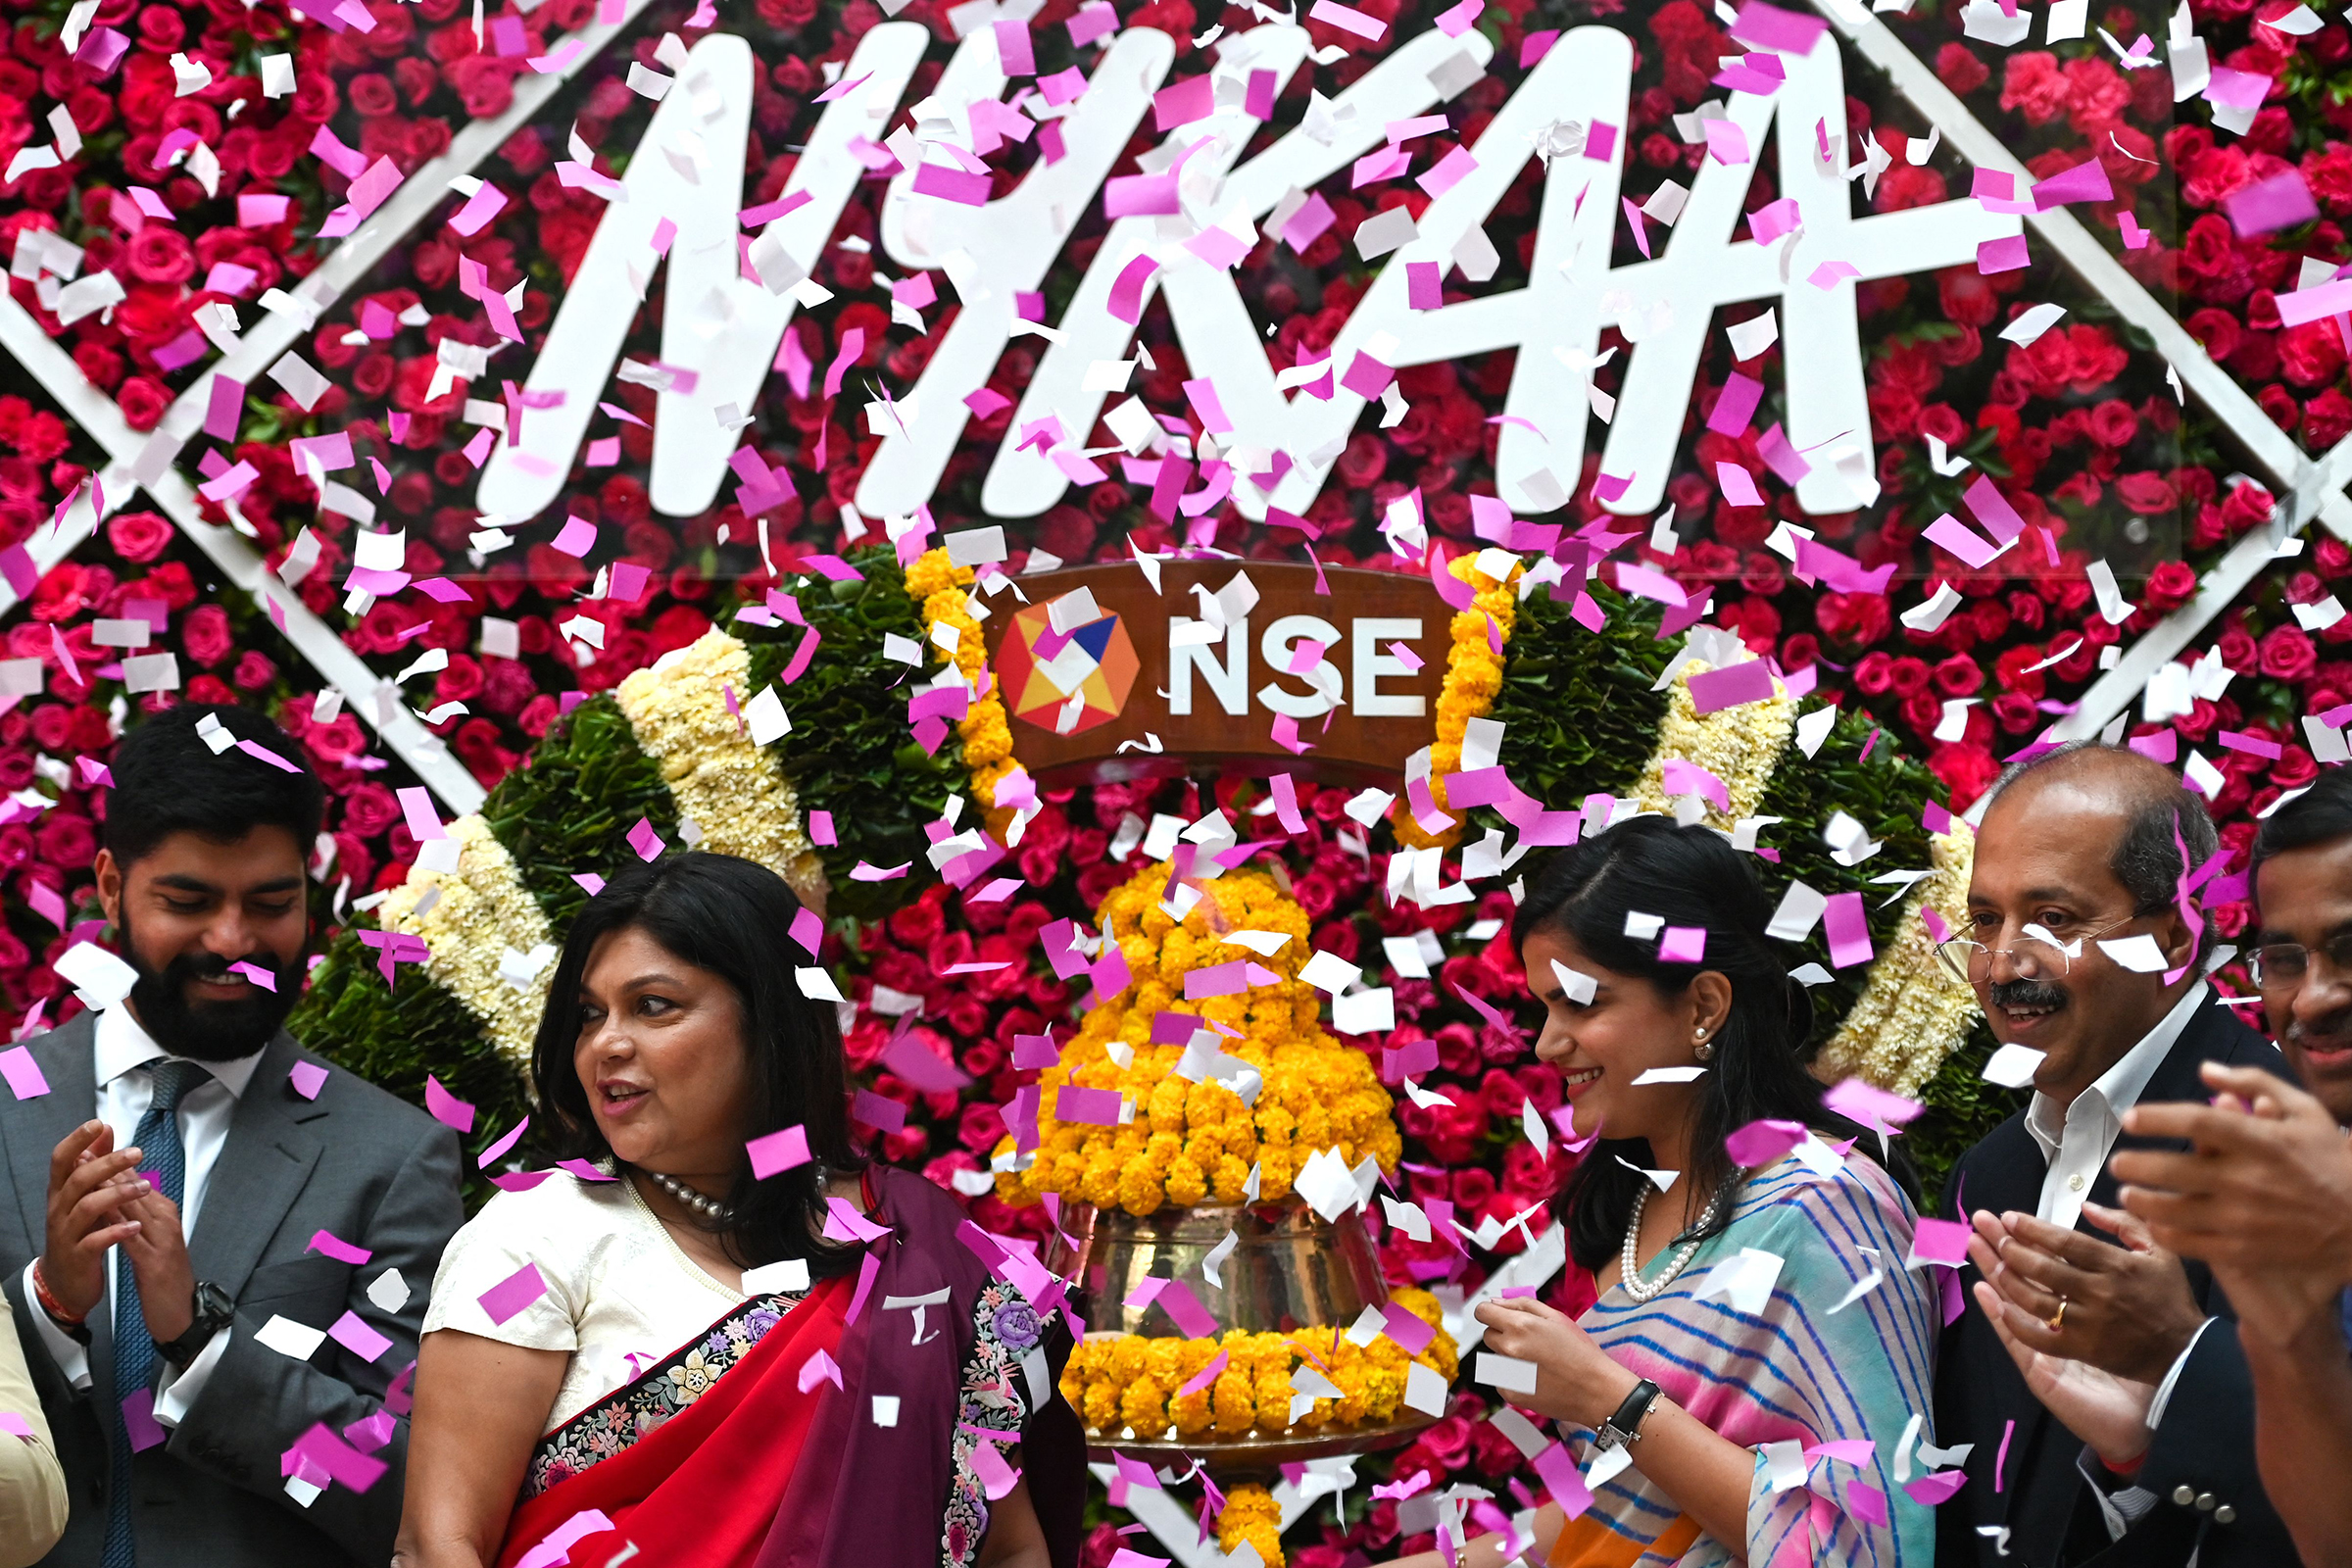 Falguni Nayar (C-L), managing director and CEO of Nykaa, an online marketplace for beauty and wellness products, along with her daughter Advaita (C-R) attends the company's IPO listing ceremony at the National Stock Exchange in Mumbai on November 10, 2021. (Punit Paranjpe—AFP/Getty Images)